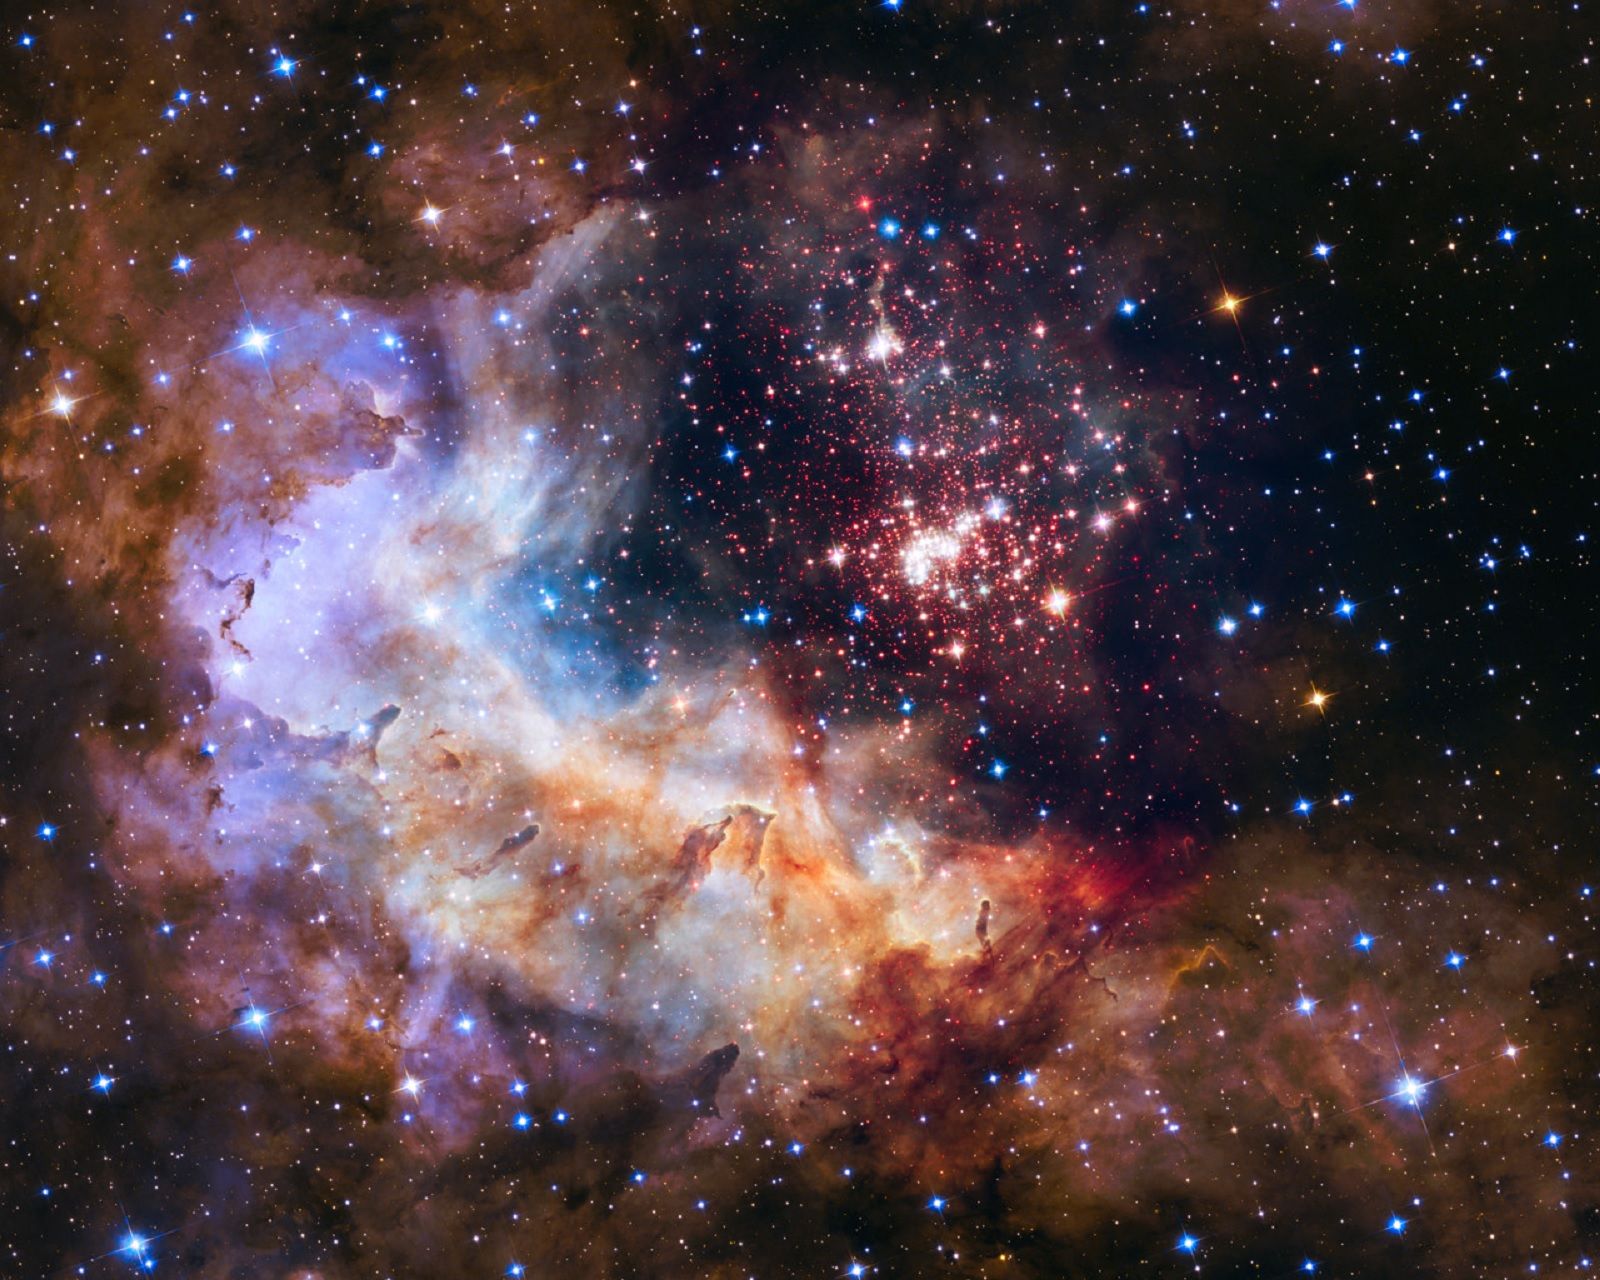 astounding images from the depths of the universe courtesy of the hubble space telescope photo 26